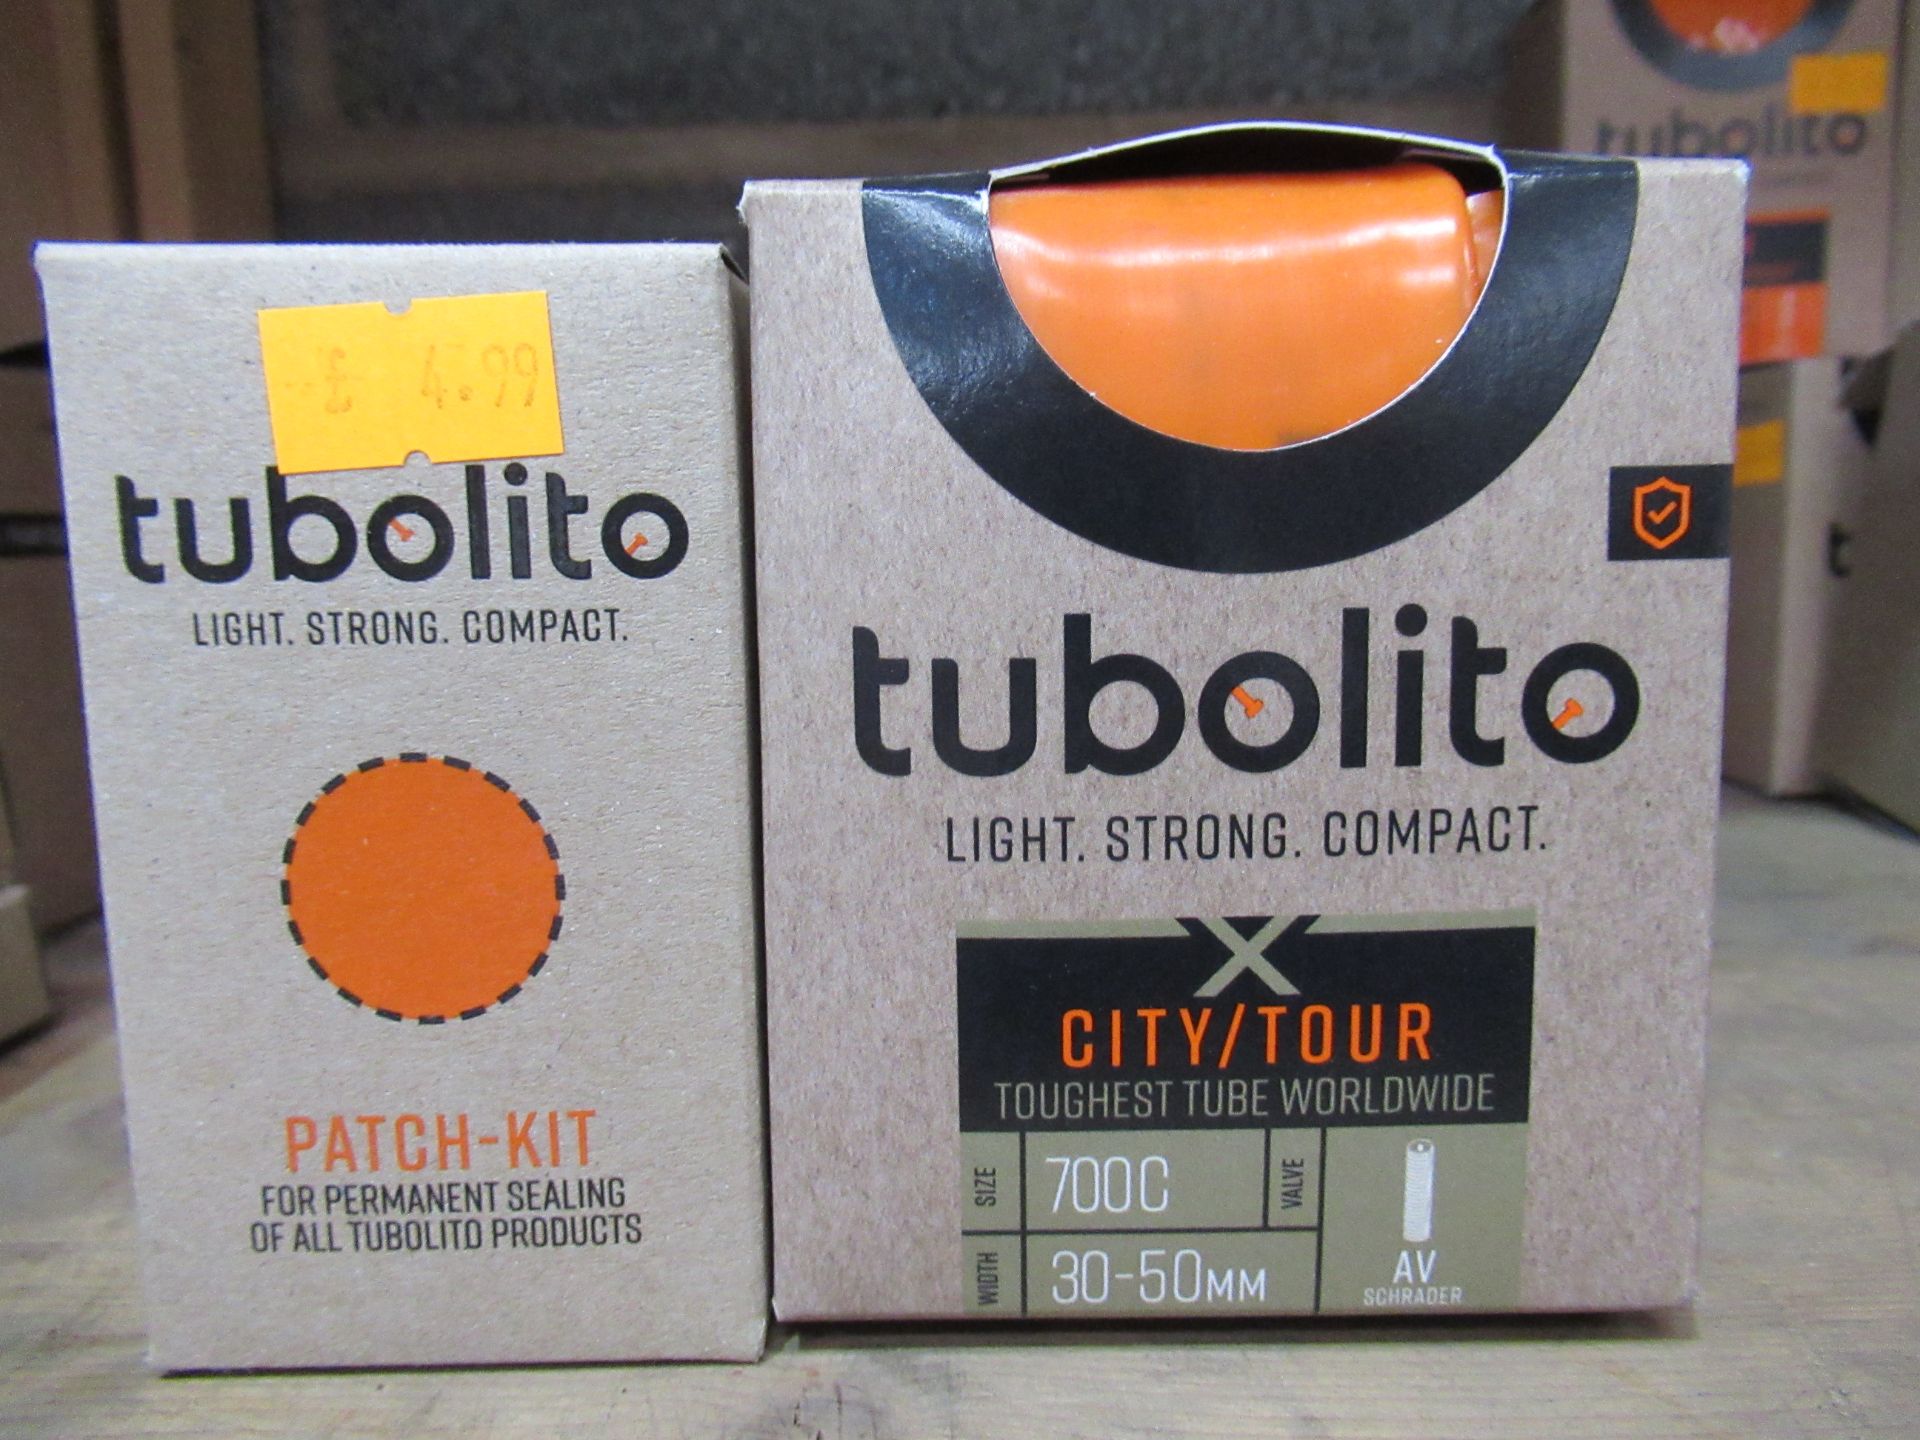 6 x Tubilito 700c City/Tour inner tubes (RRP£27.99 each) and 6 x Tubolito patch kits (RRP£4.99 each) - Image 2 of 2